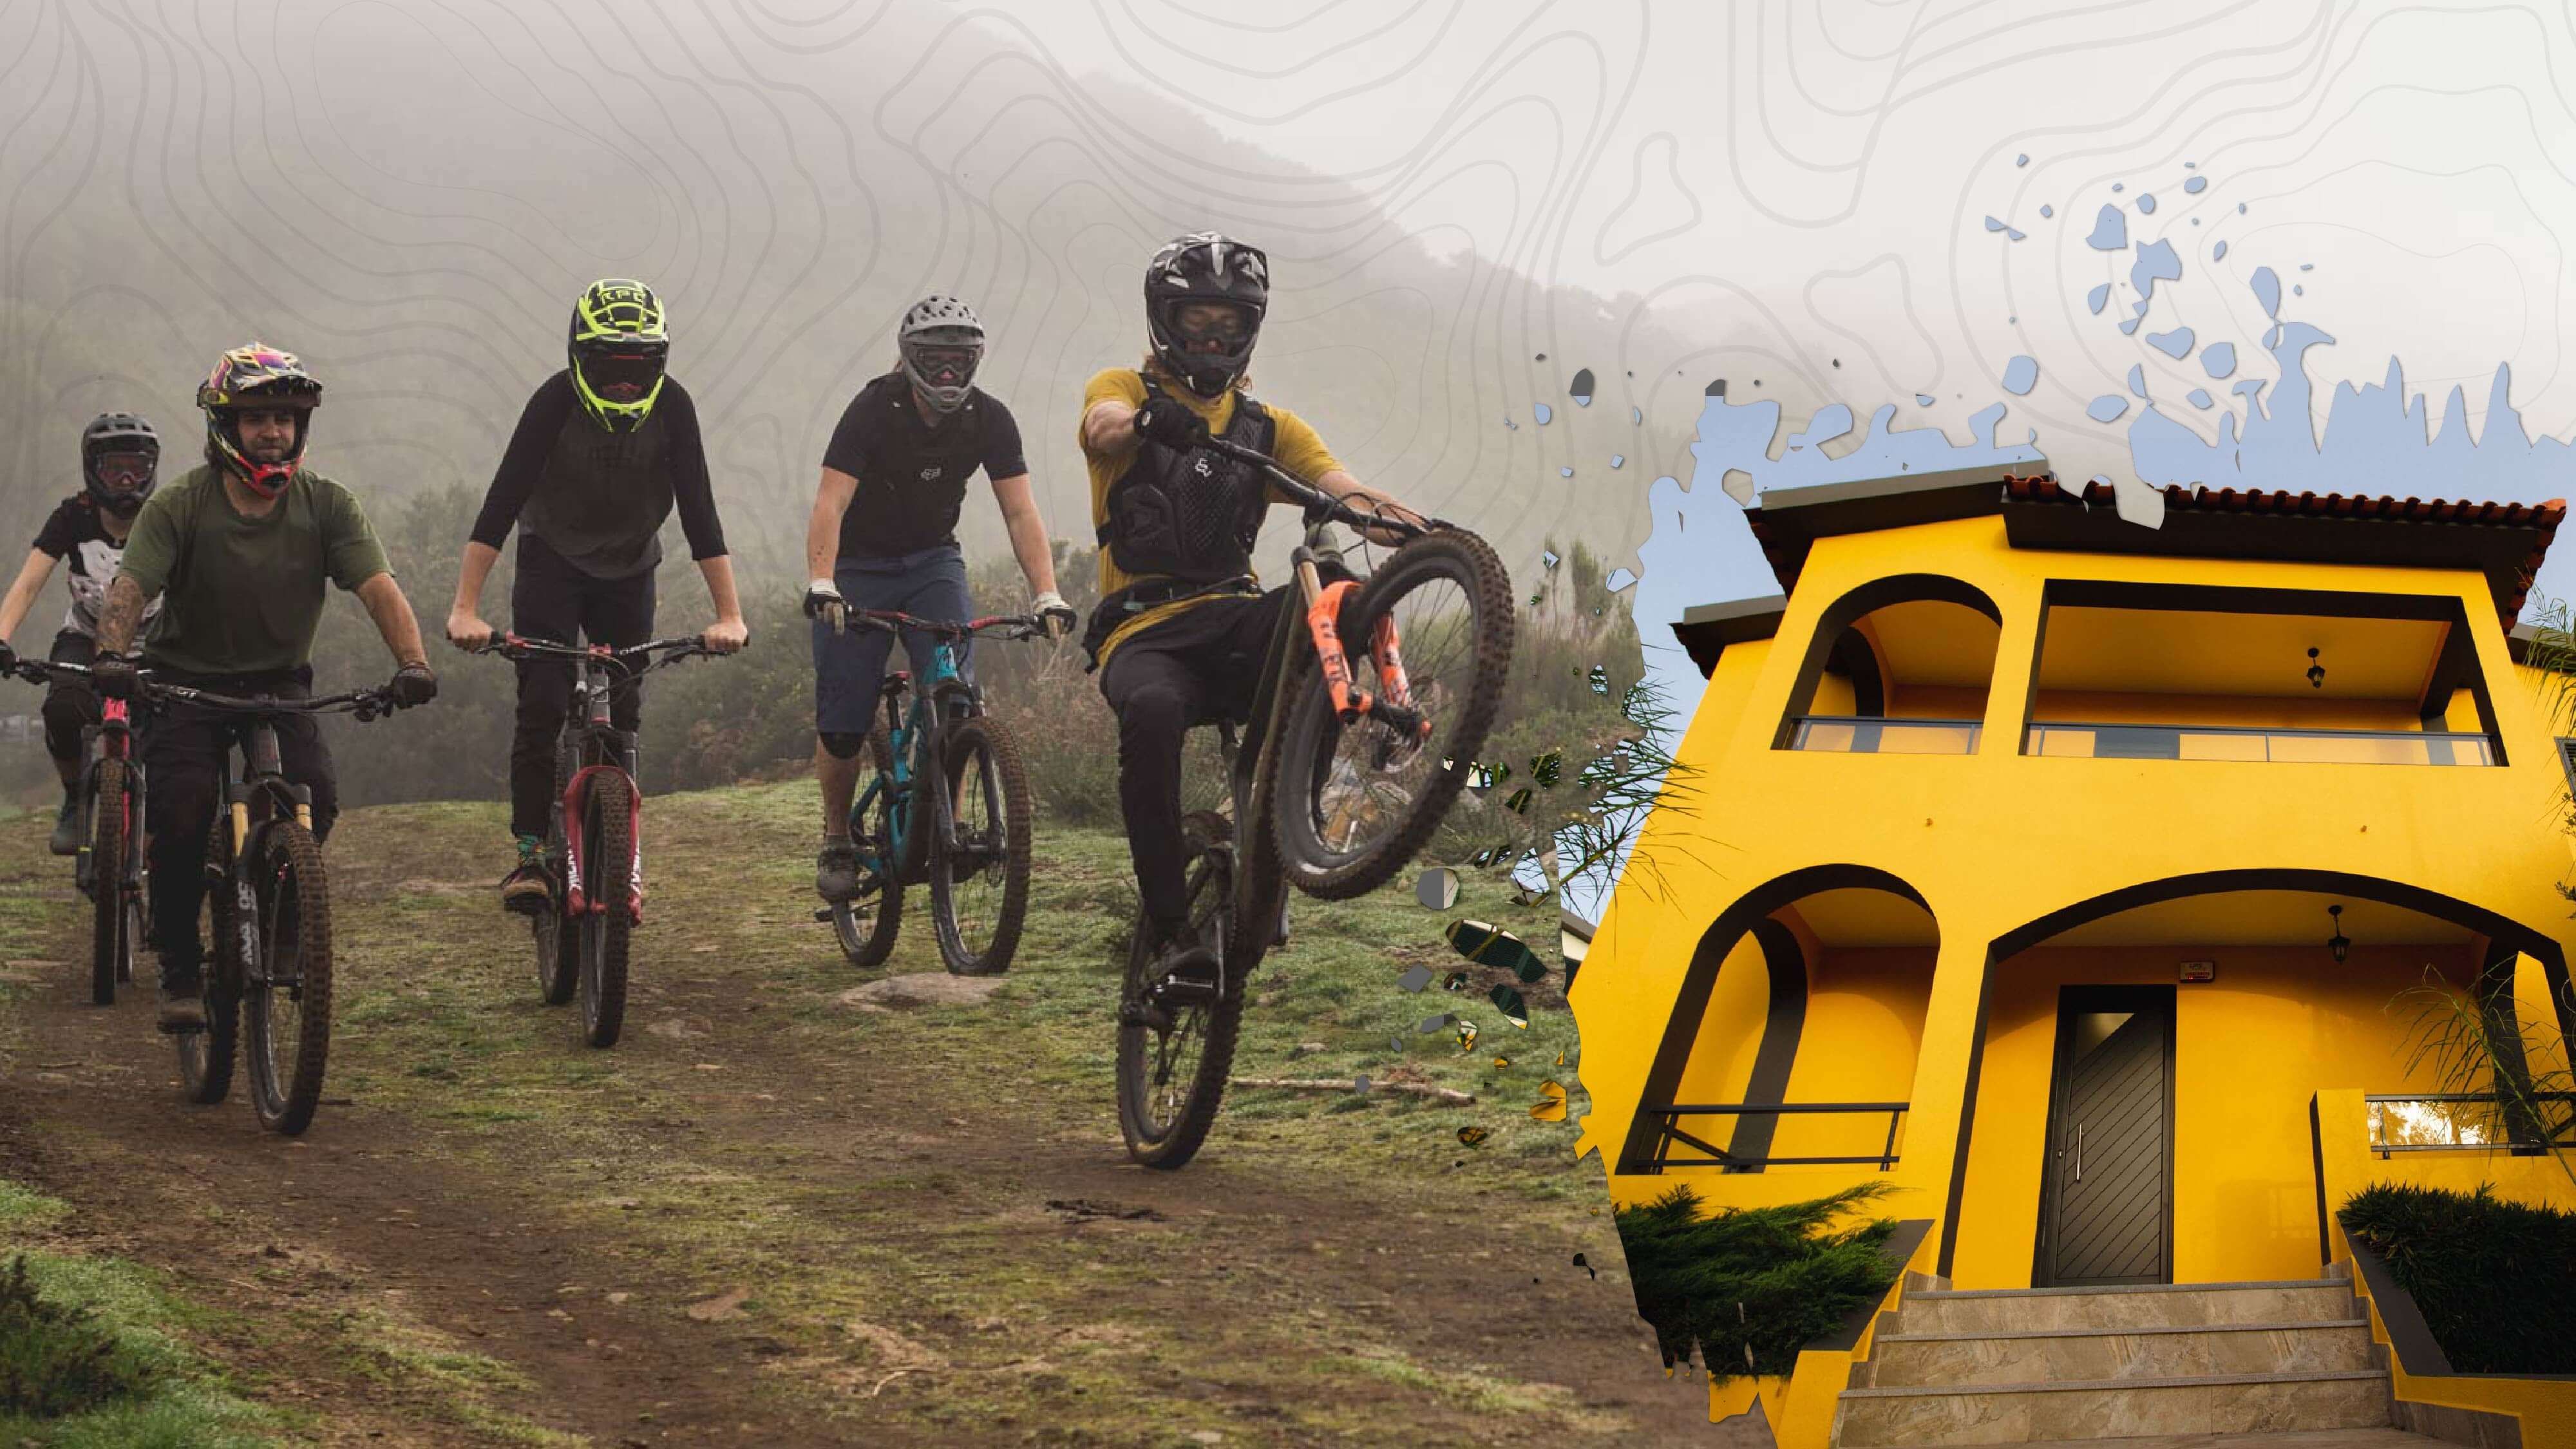 Embarking on an unforgettable journey through the enchanting landscapes of Madeira Island on a beginner's mountain biking tour.